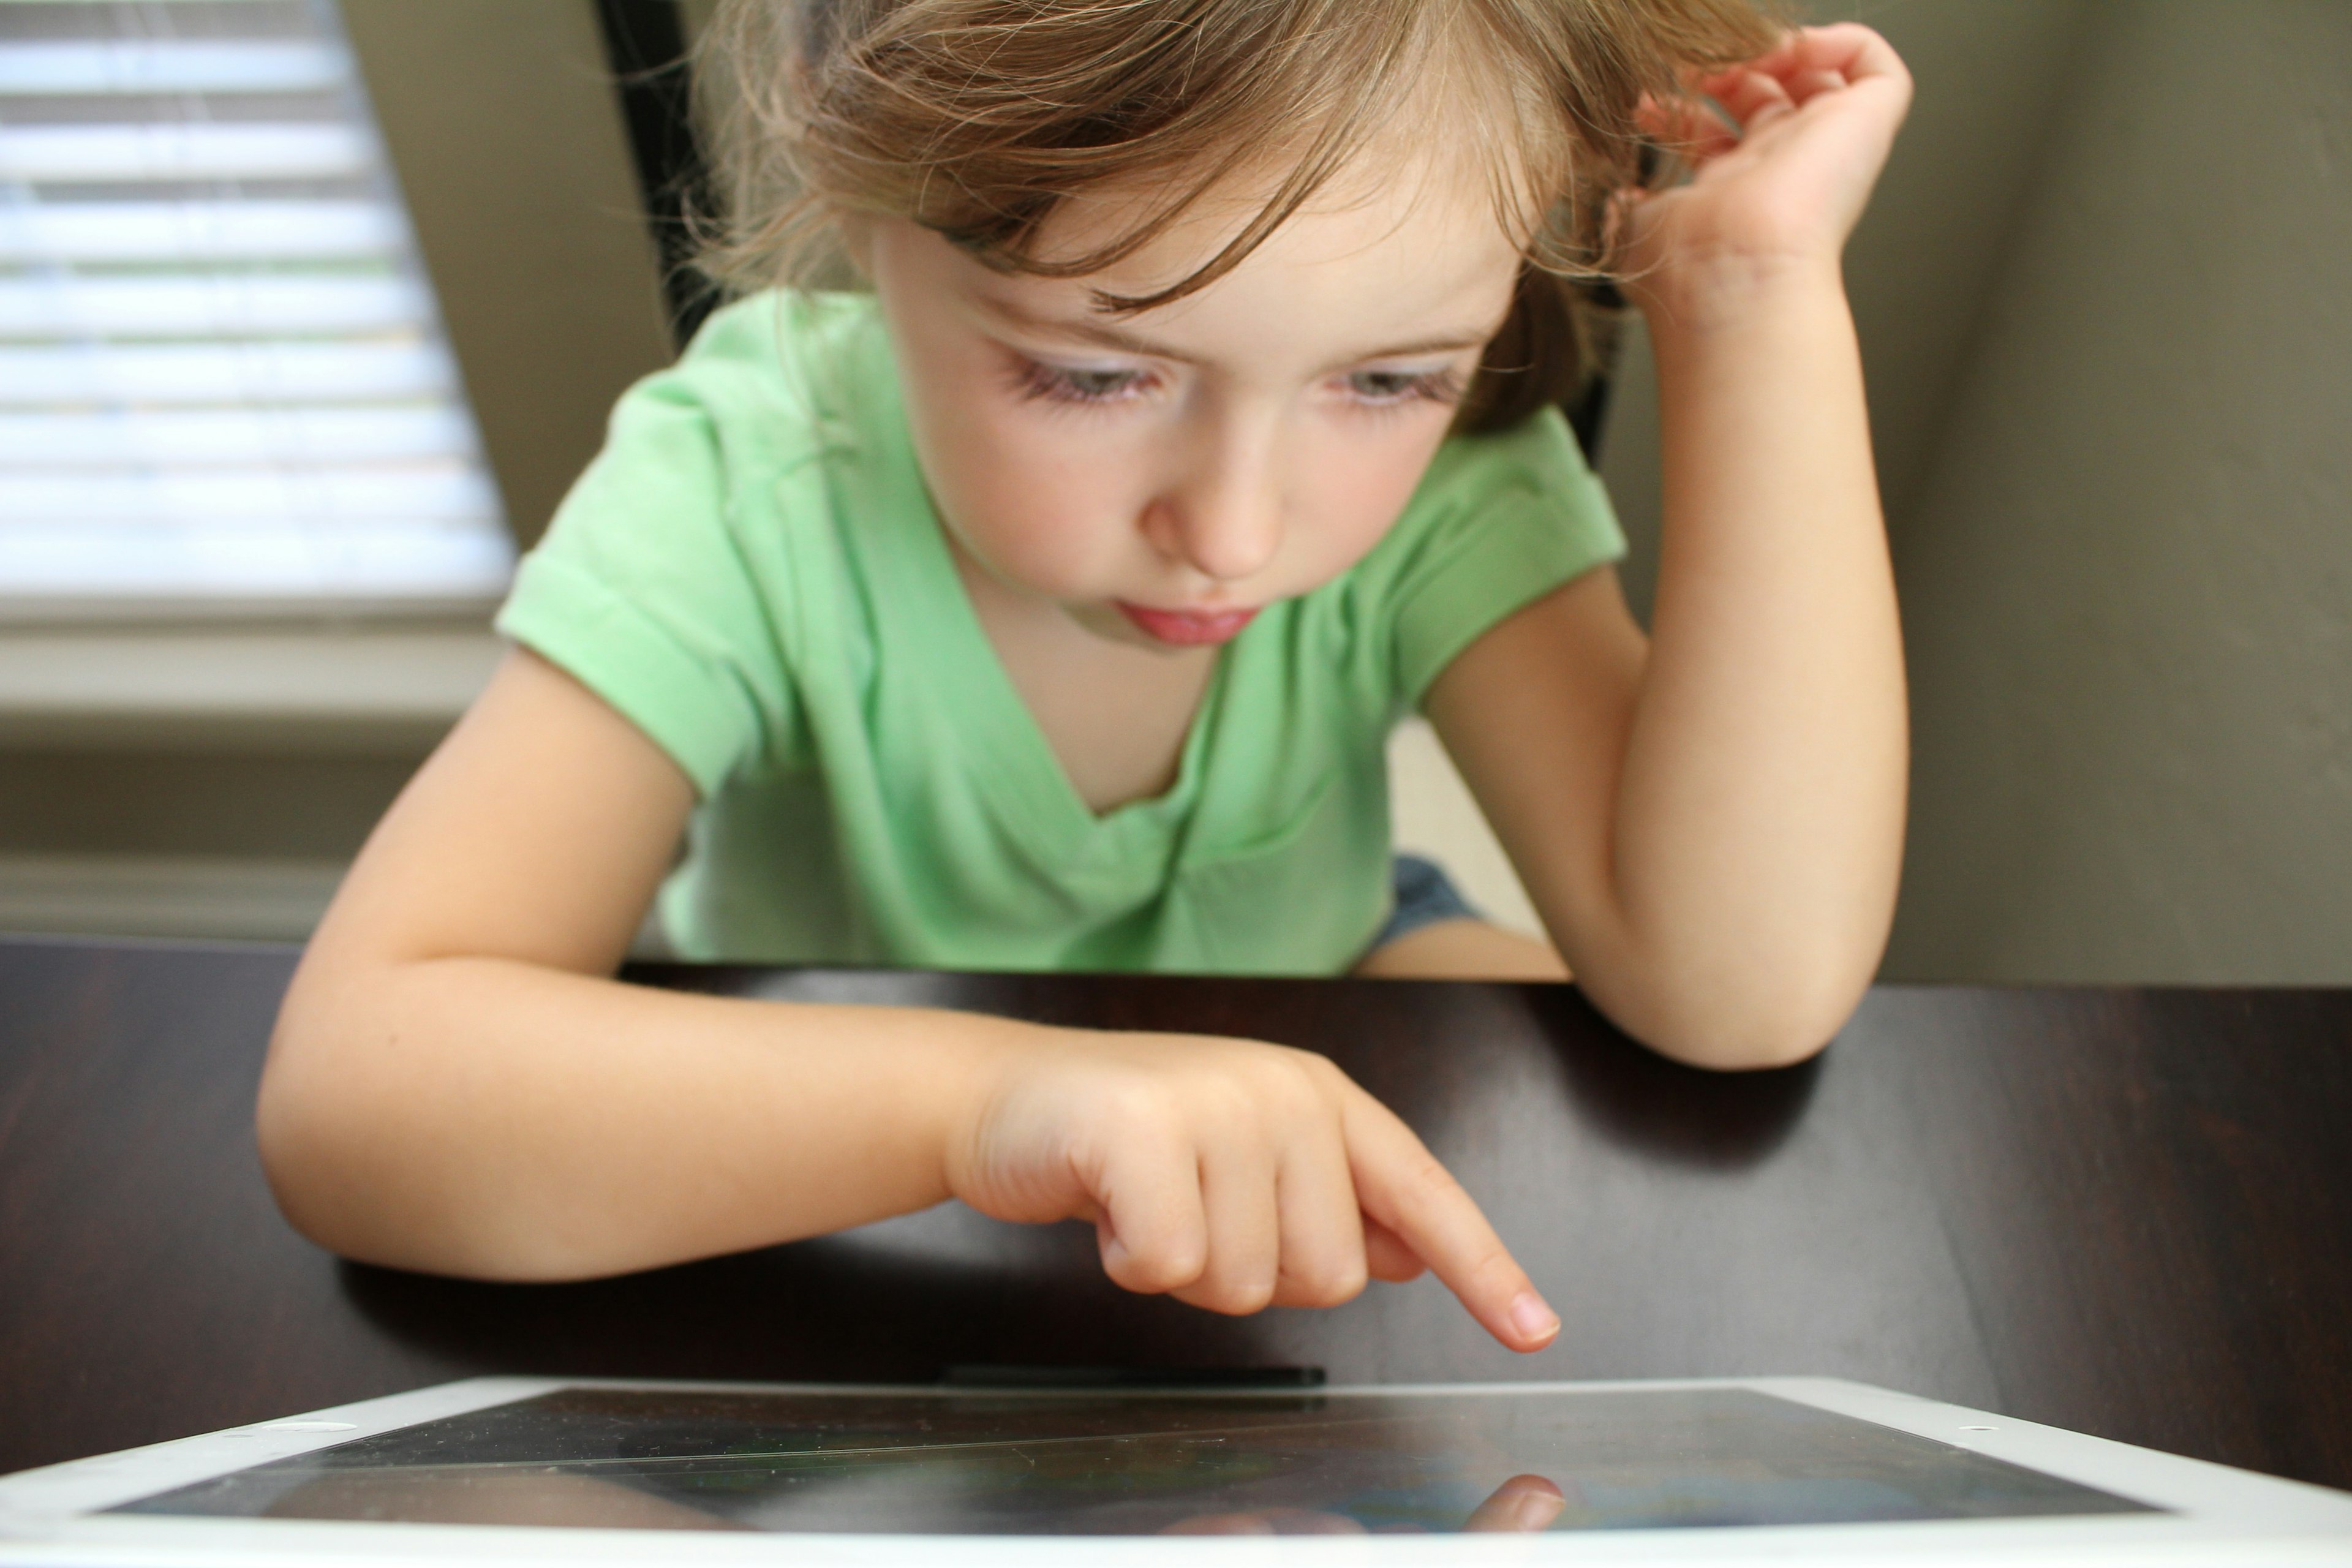 A child uses a touch screen tablet computer.